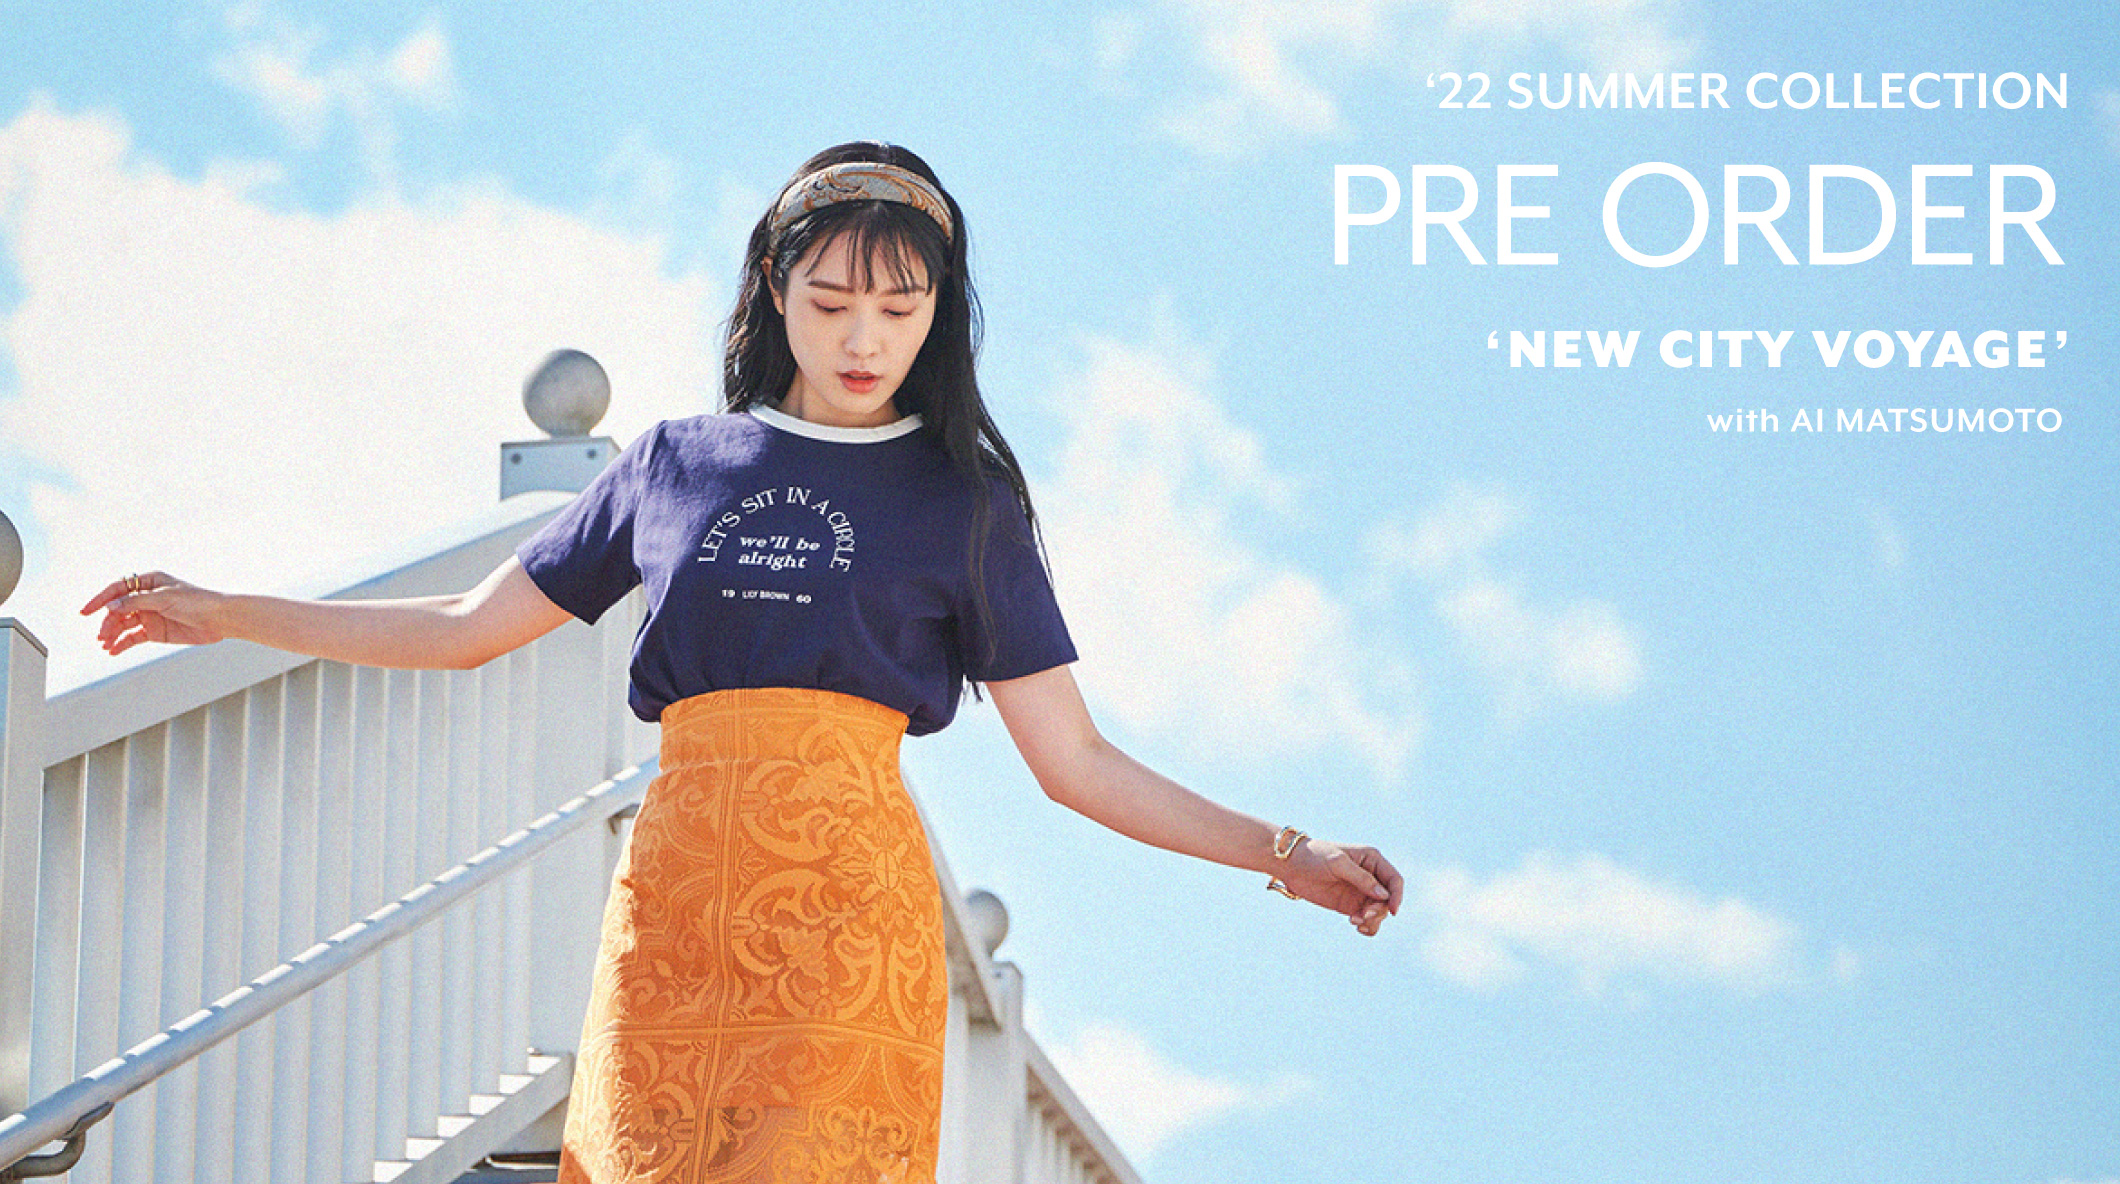 '22 SUMMER COLLECTION PRE ORDER 'NEW YORK VOYAGE’ with AI MATSUMOTO